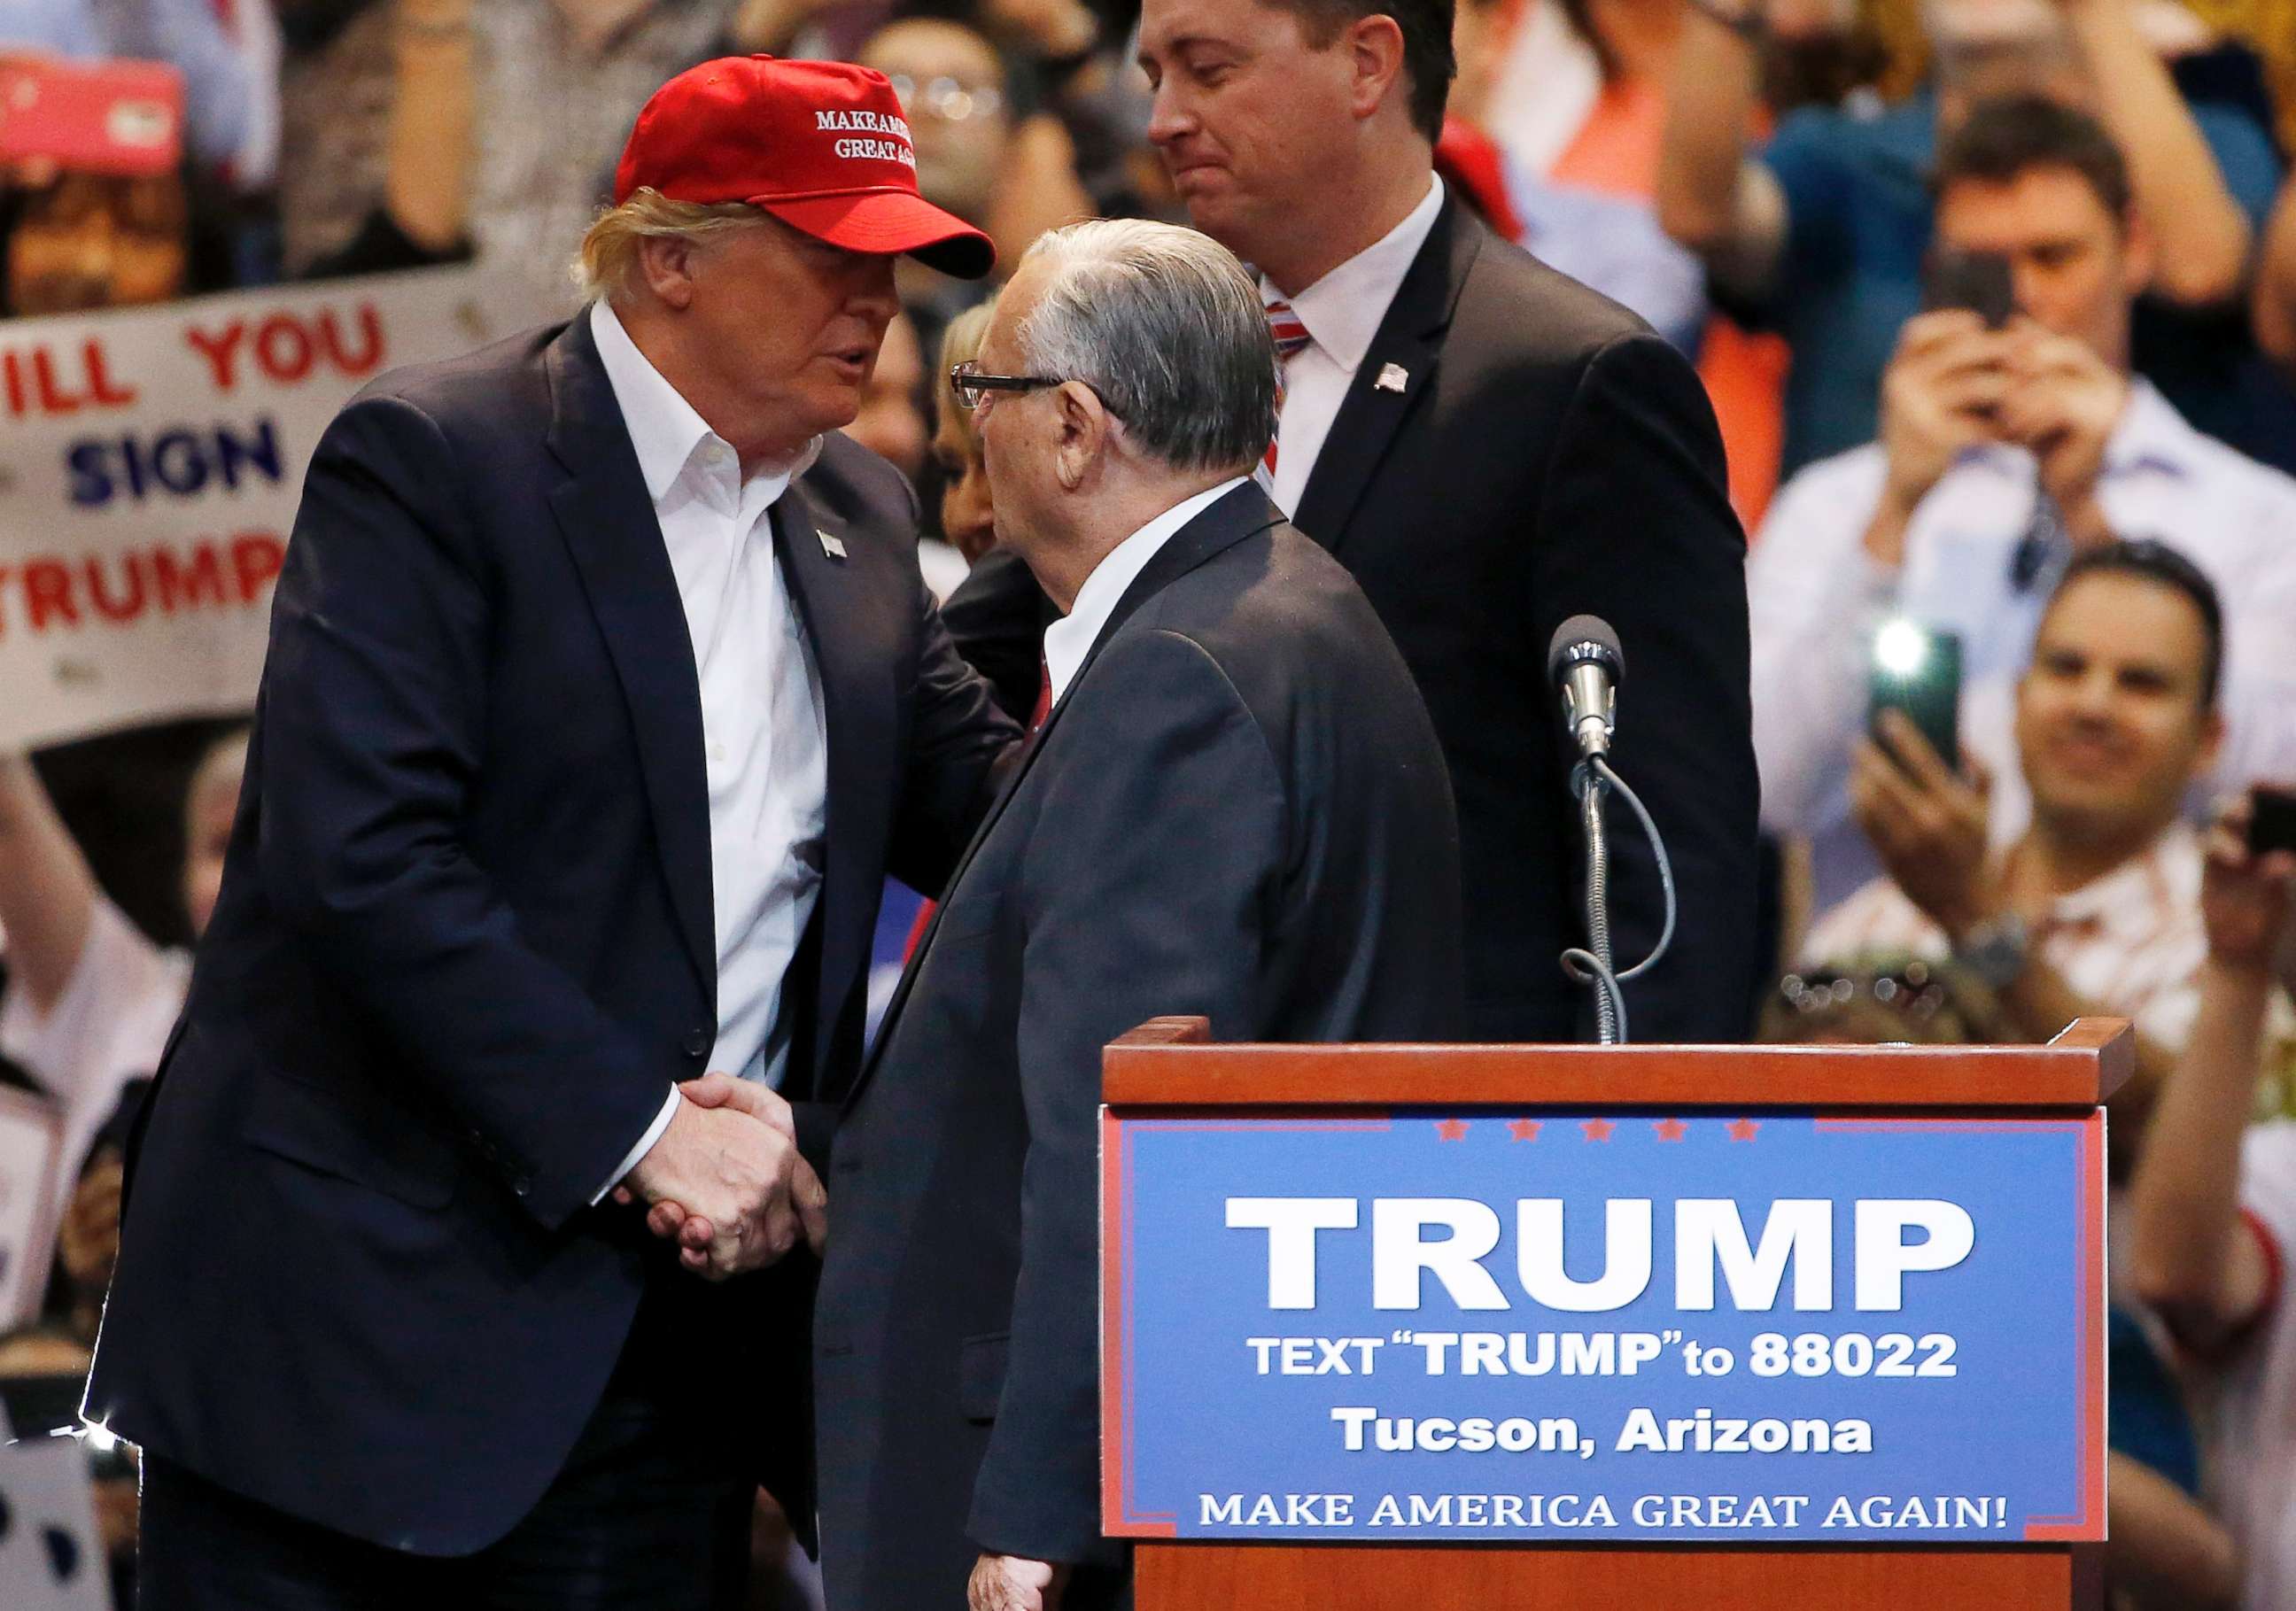 PHOTO: Then presidential candidate Donald Trump shakes hands with Maricopa County Sheriff Joe Arpaio prior to speaking at a campaign rally, March 19, 2016, in Tucson, Ariz.